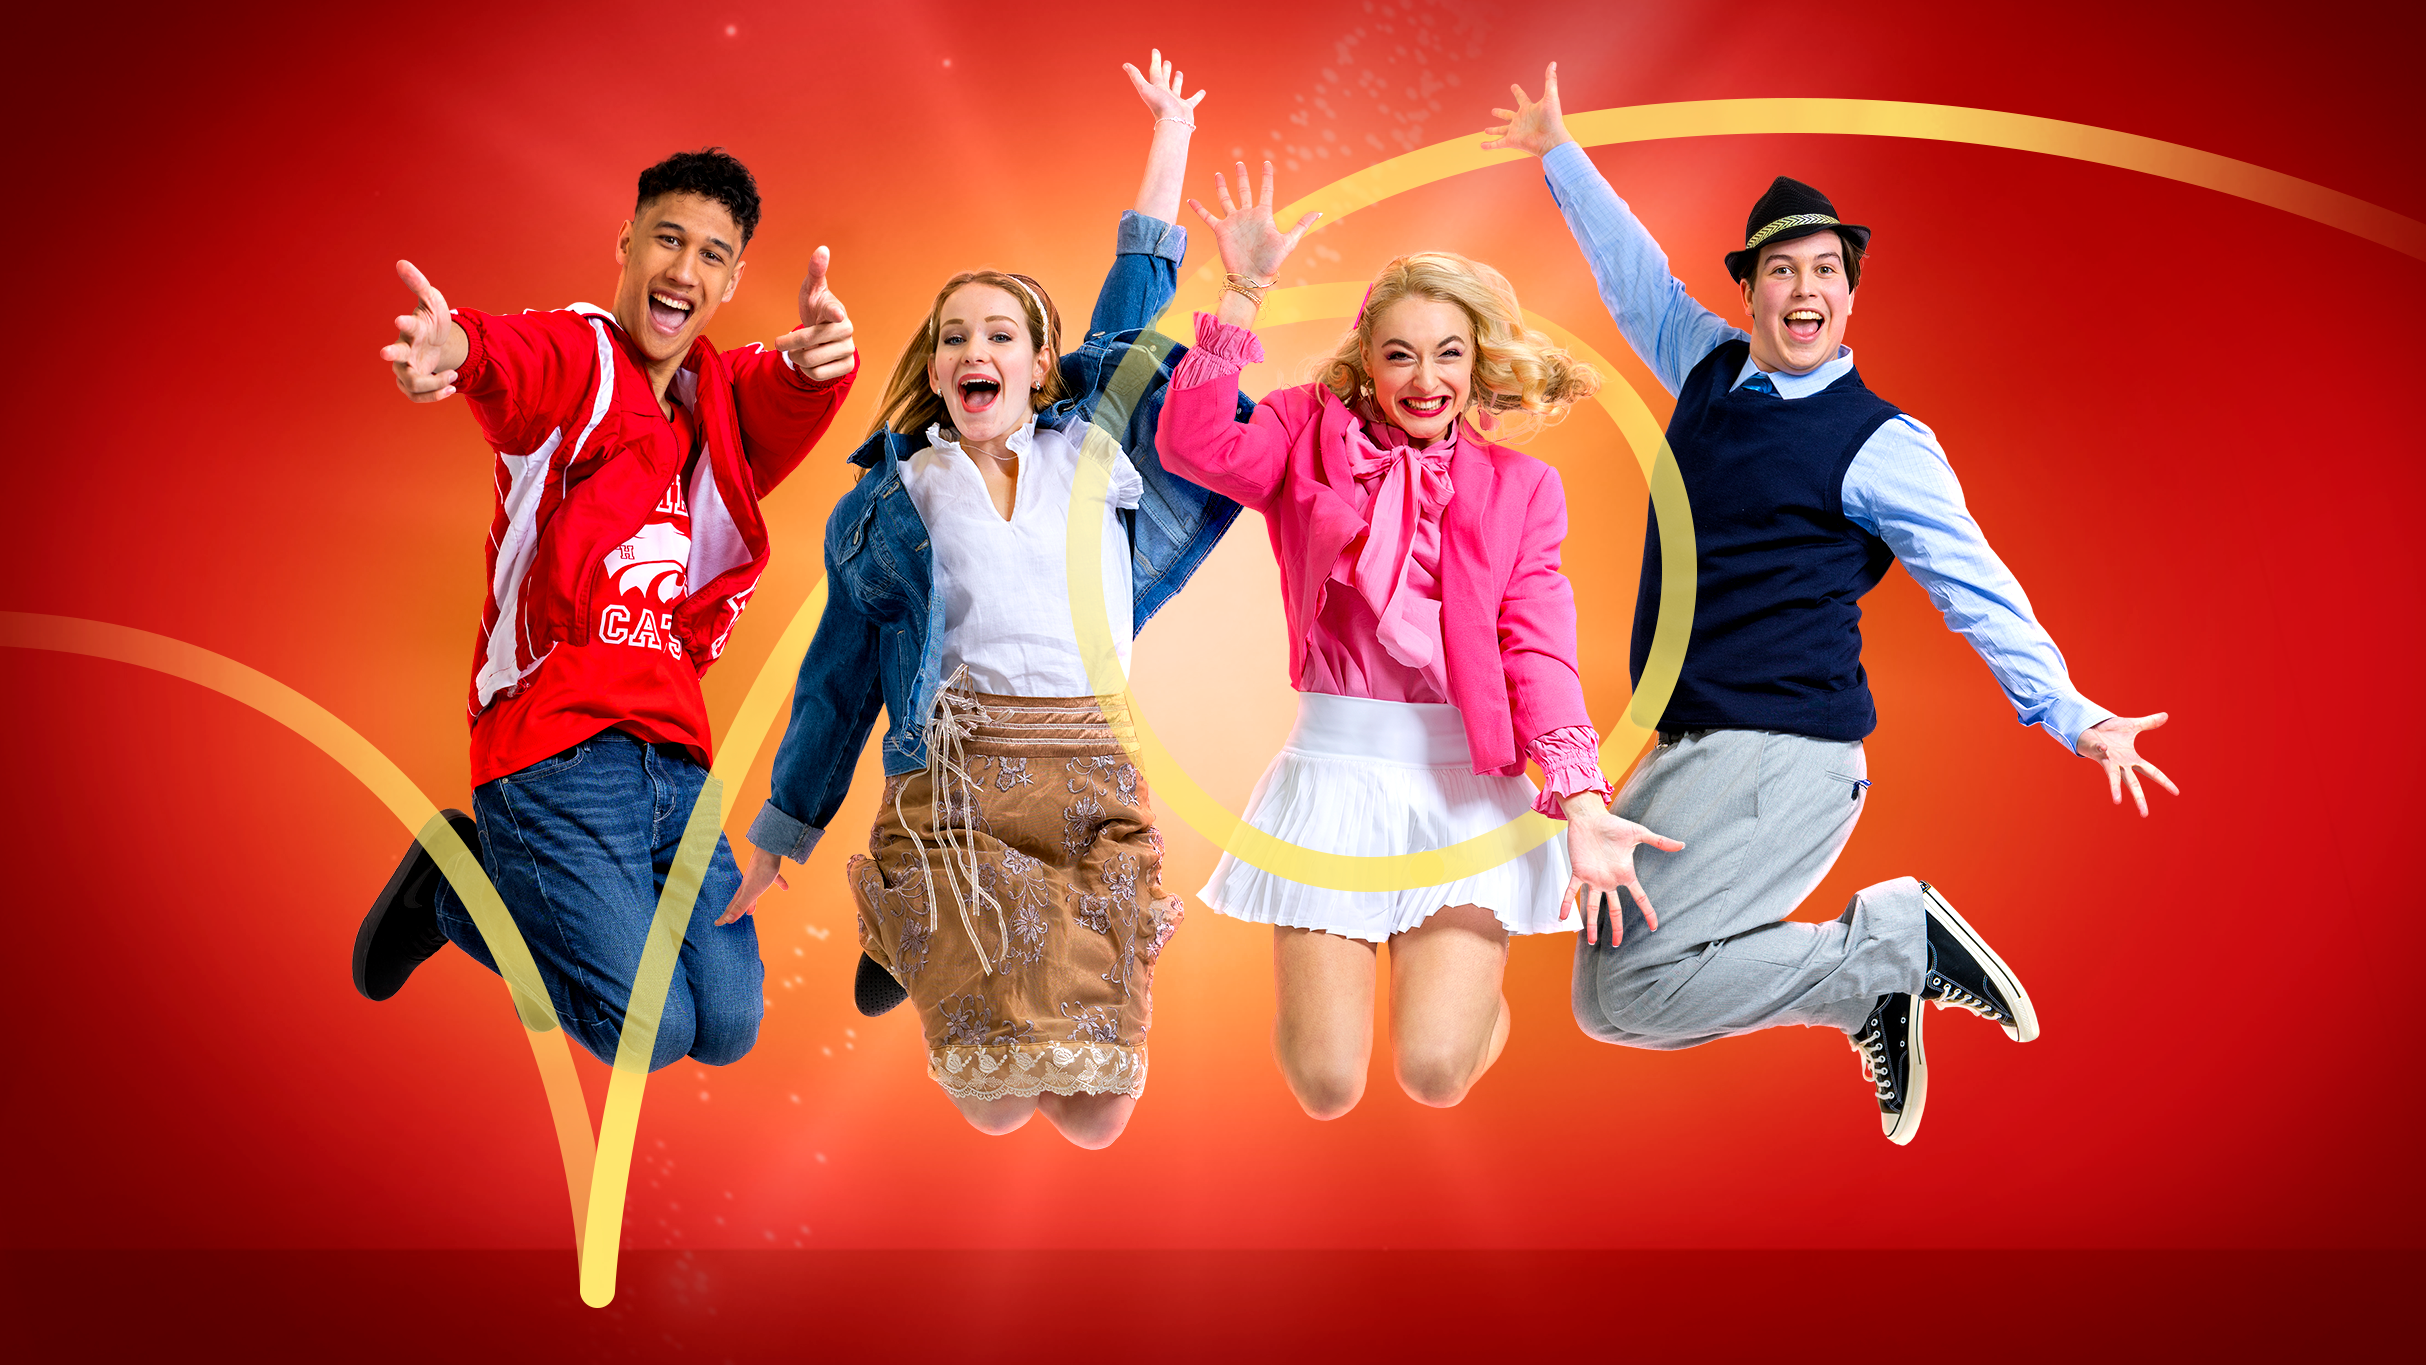 Image used with permission from Ticketmaster | National Youth Theatre Disneys High School Musical On Stage! tickets